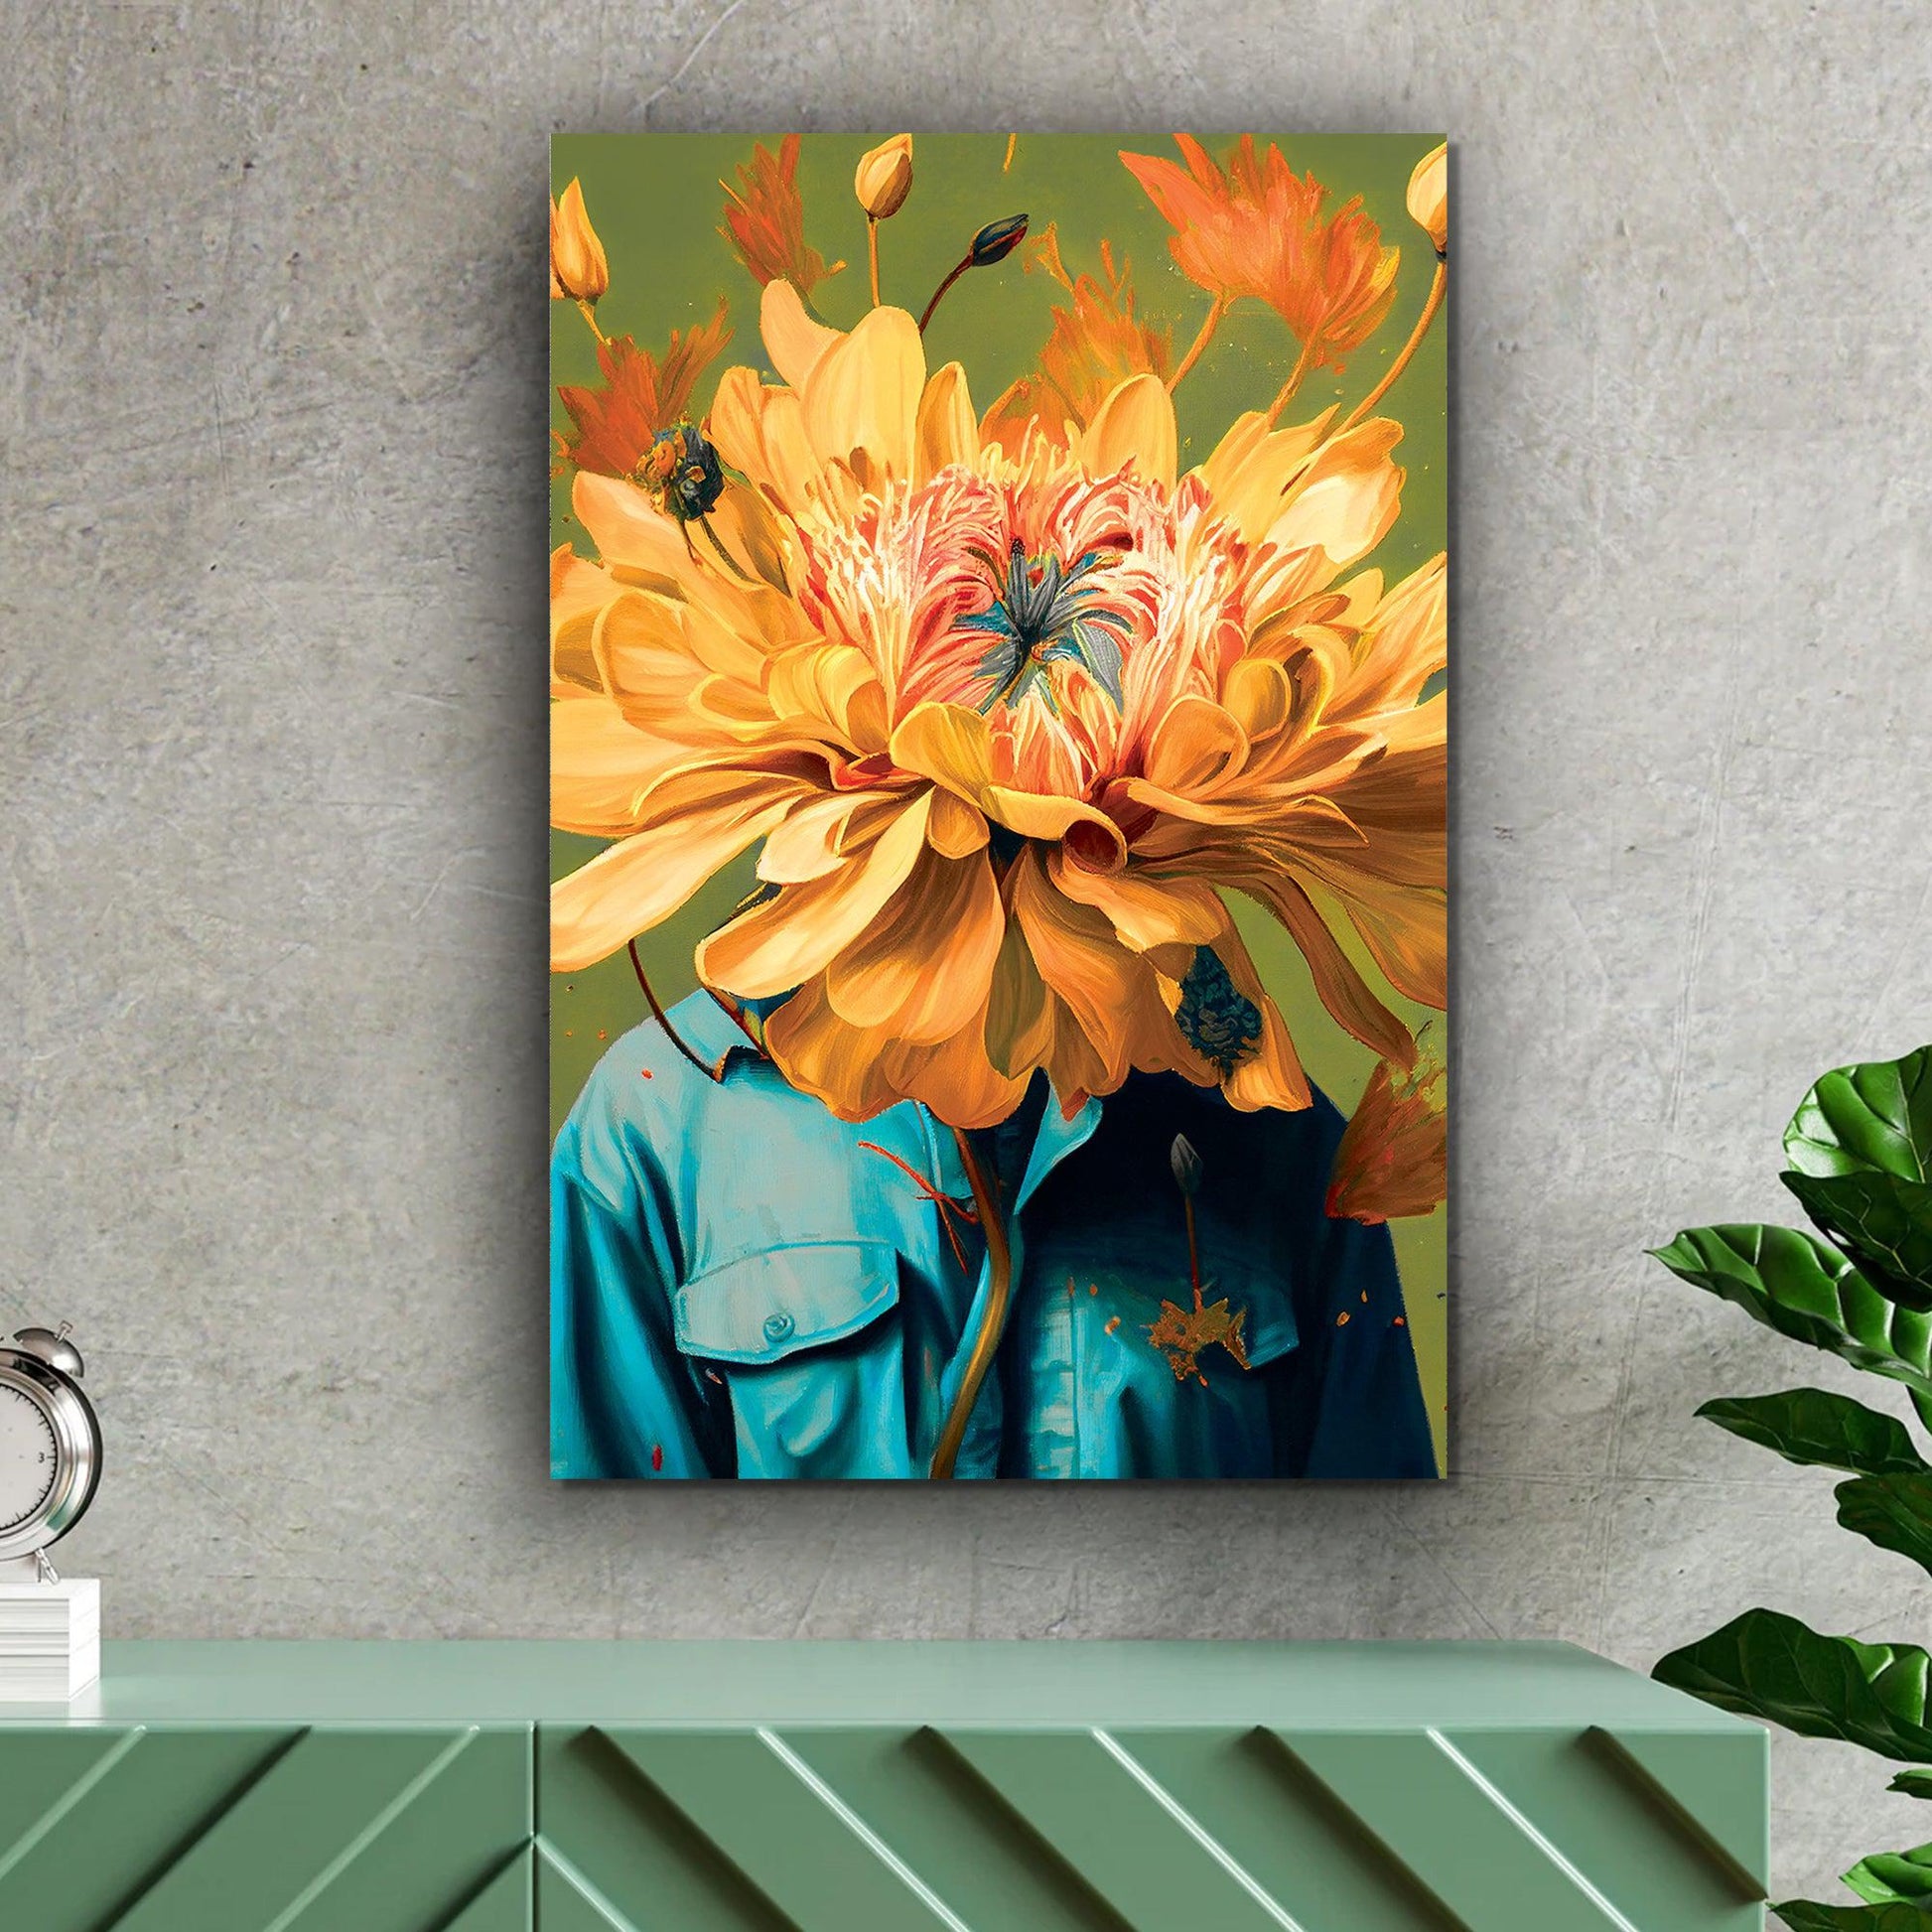 Floral Canvas Painting - Vibrant Large Canvas Art for Wall Decor